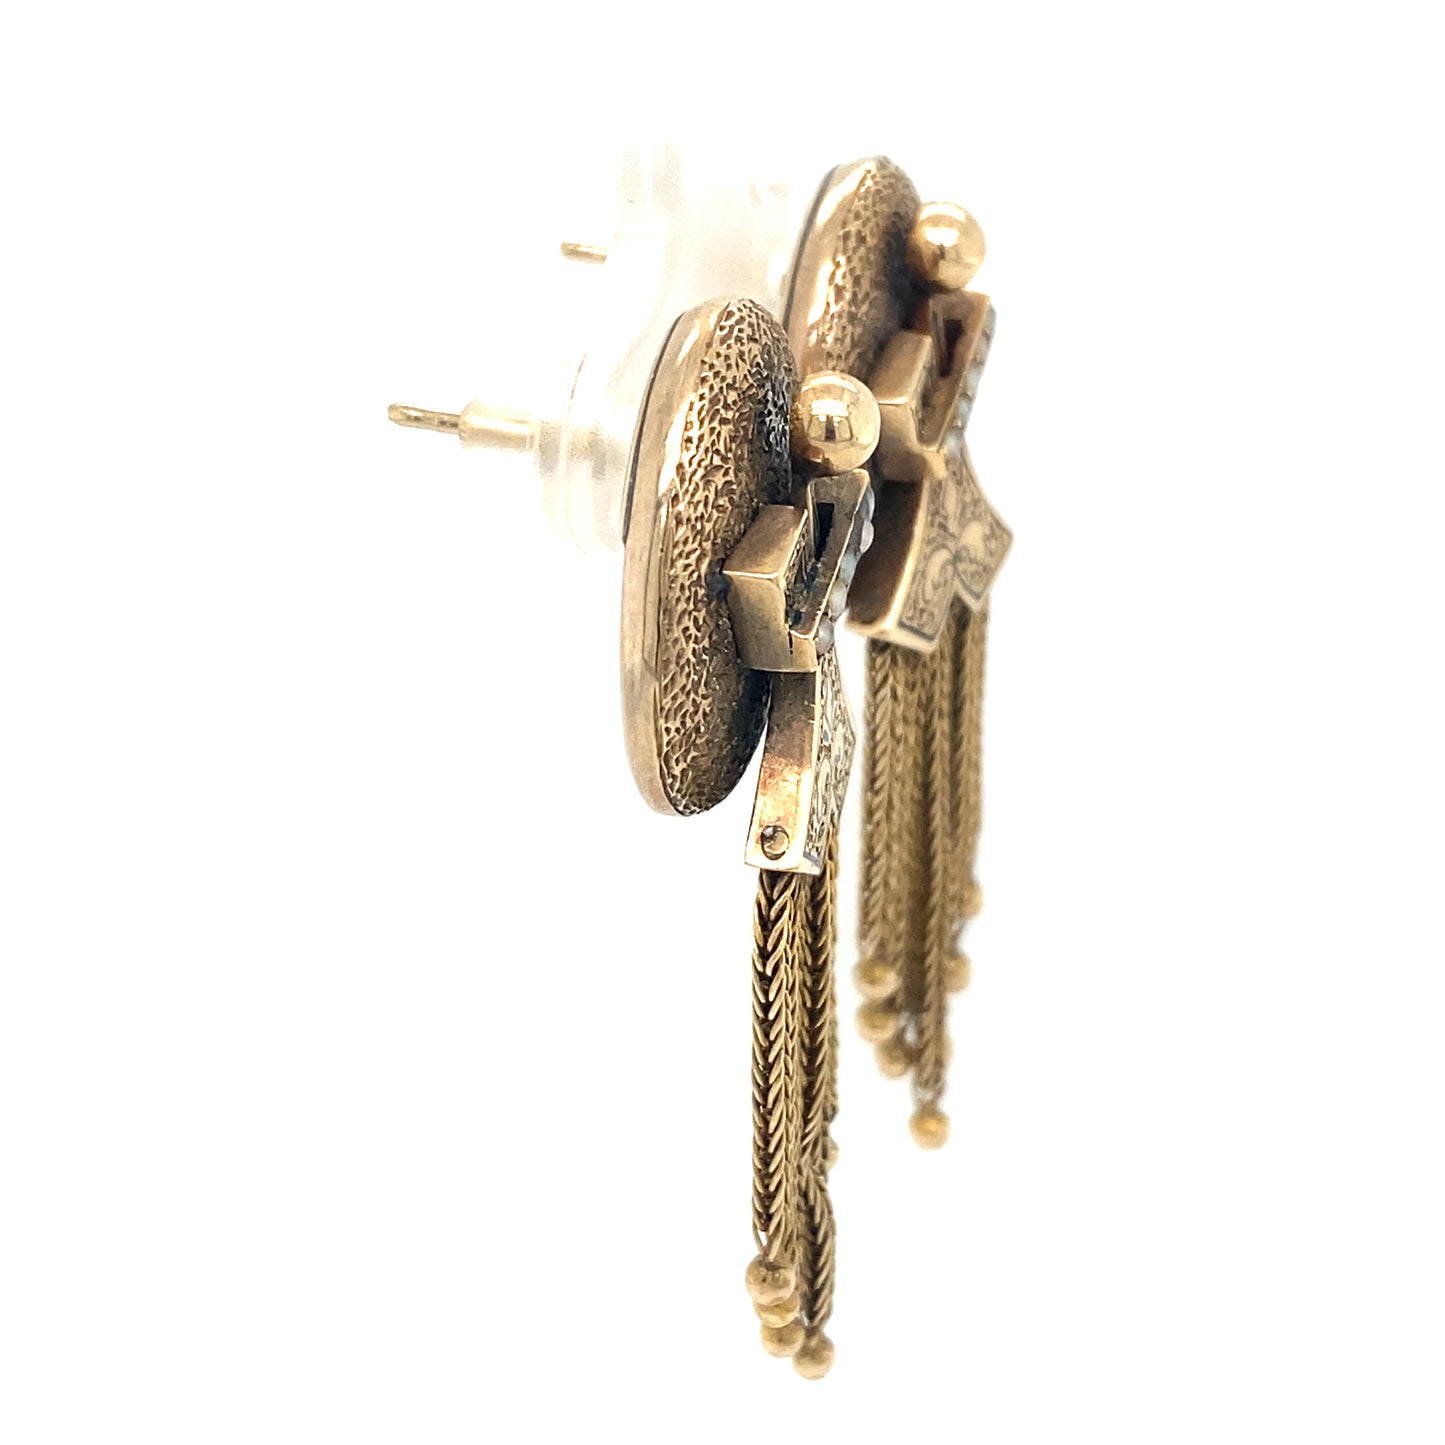 Circa 1870s Victorian Oval Seed Pearl Earrings with Tassels in 14K Gold